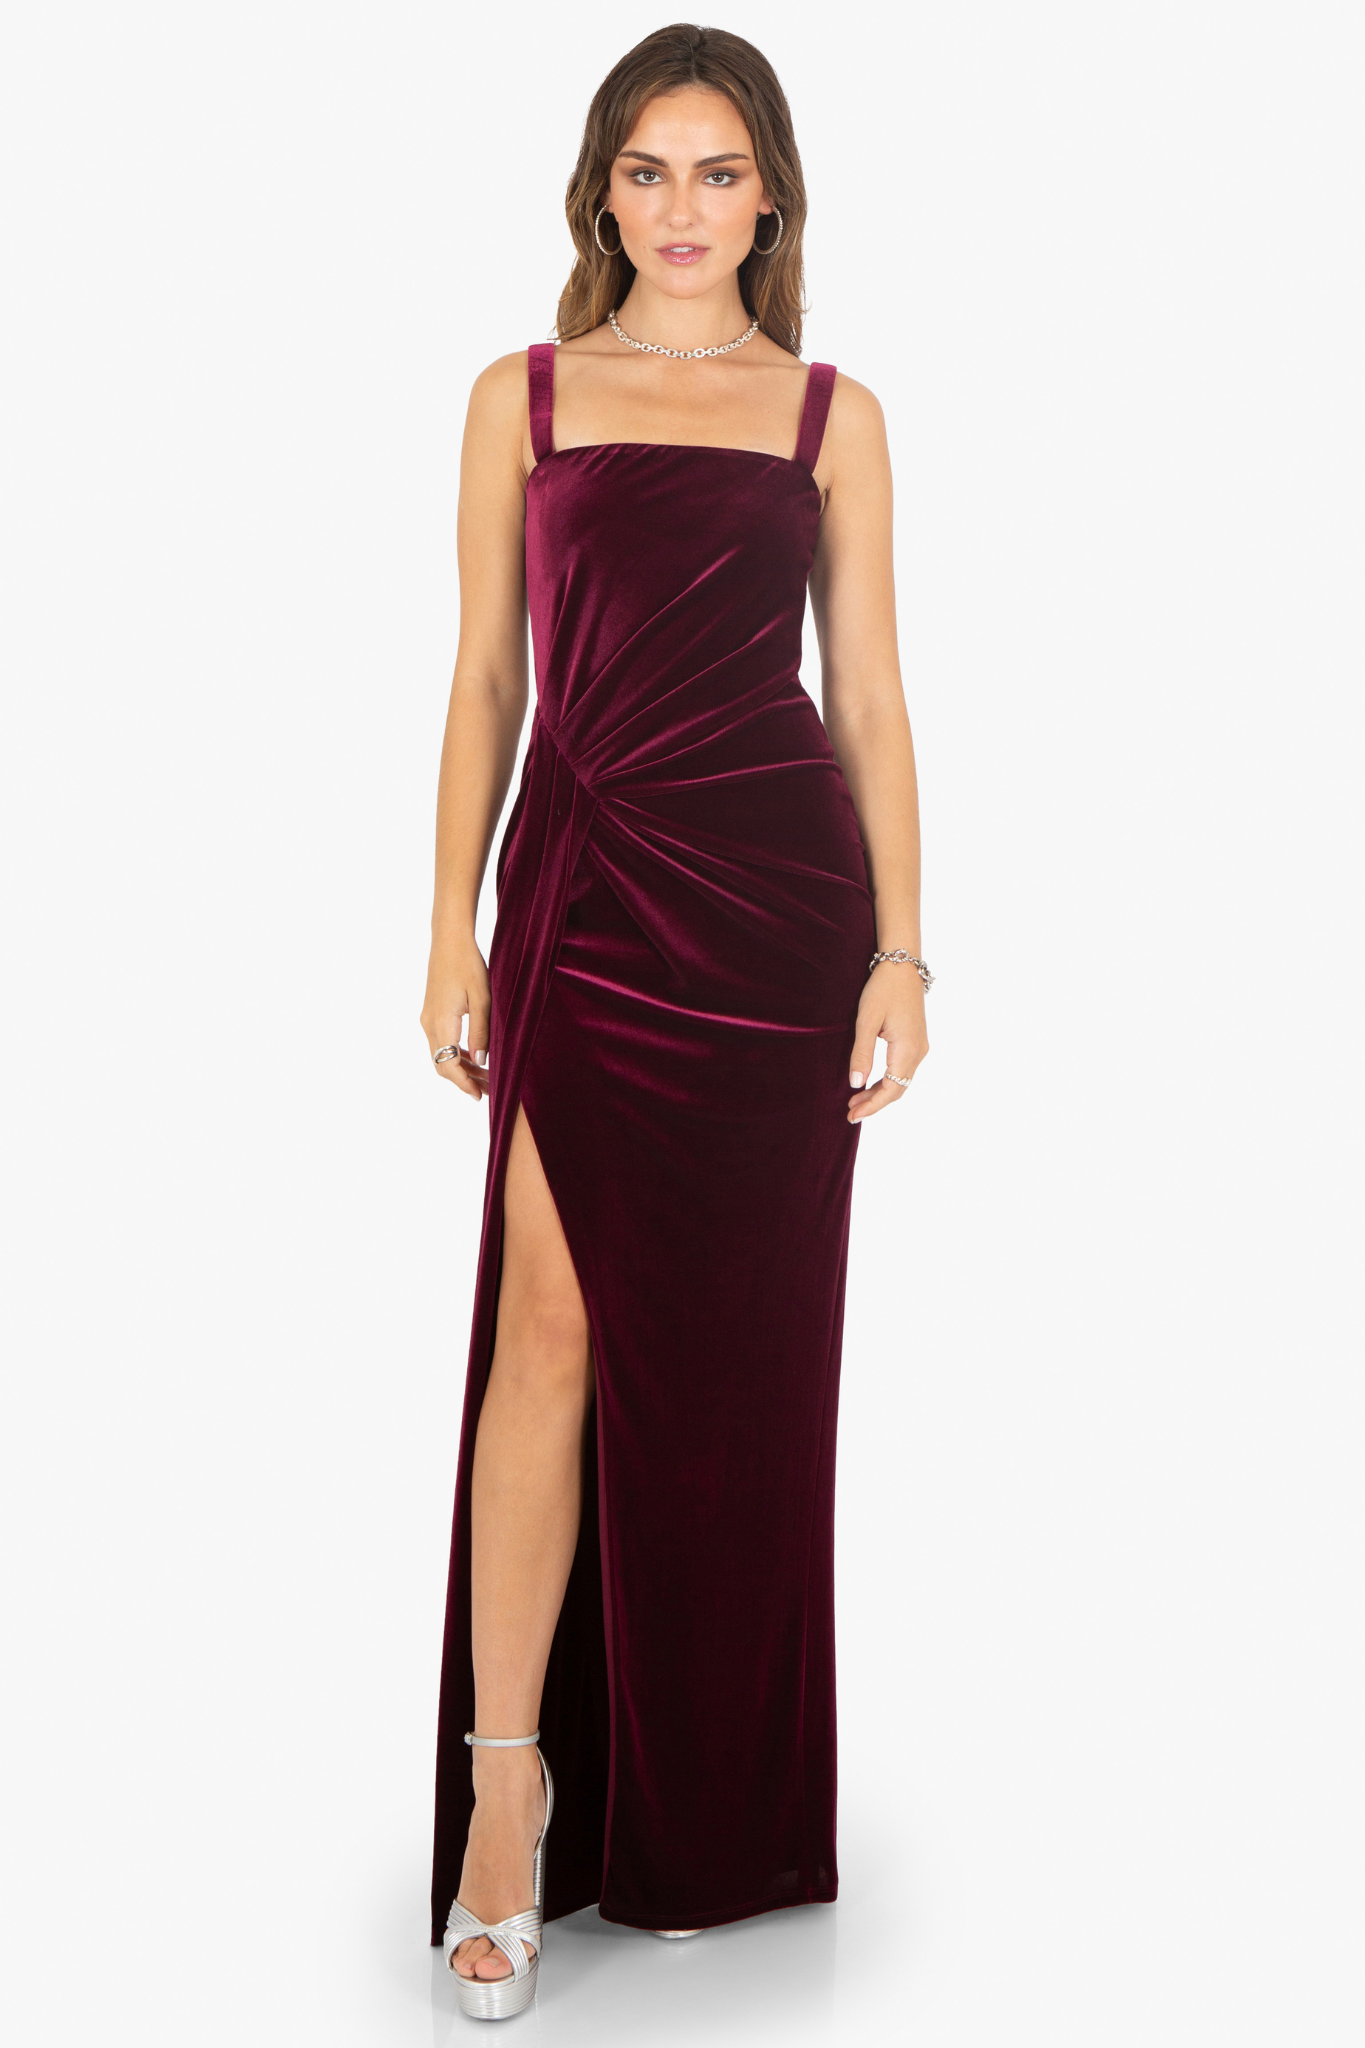 Domino Gown in Burgundy by Black Halo - RENTAL – The Fitzroy